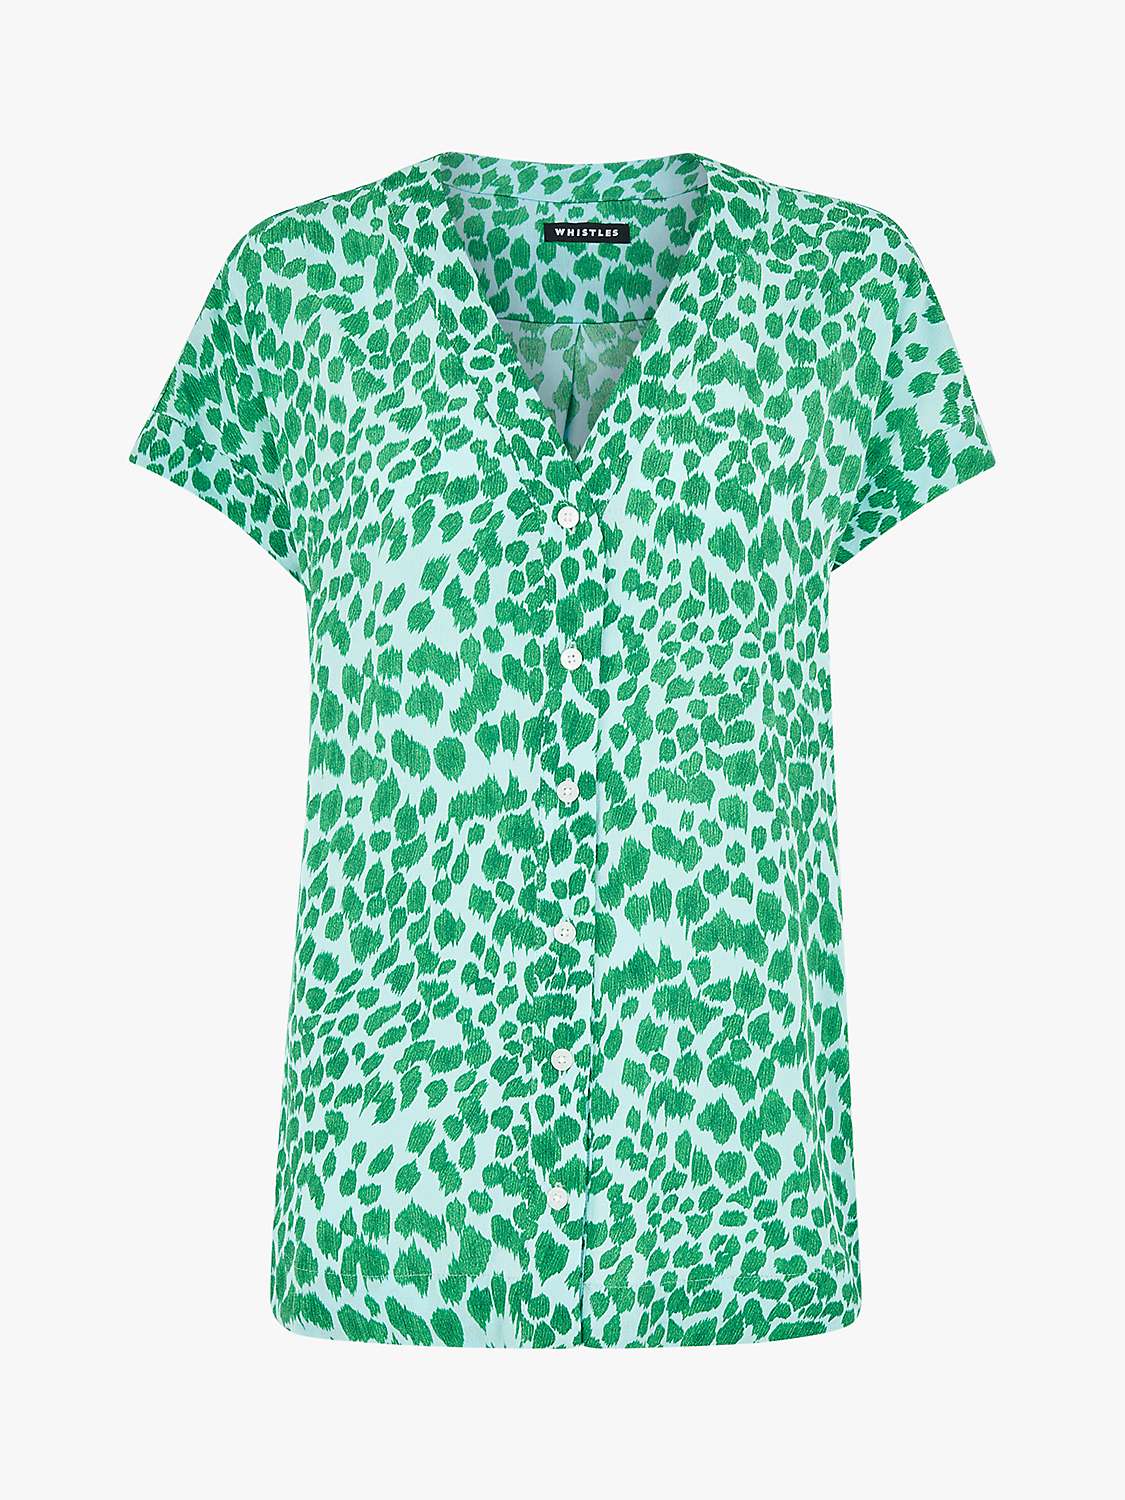 Buy Whistles Smooth Leopard Print Blouse, Green/Multi Online at johnlewis.com